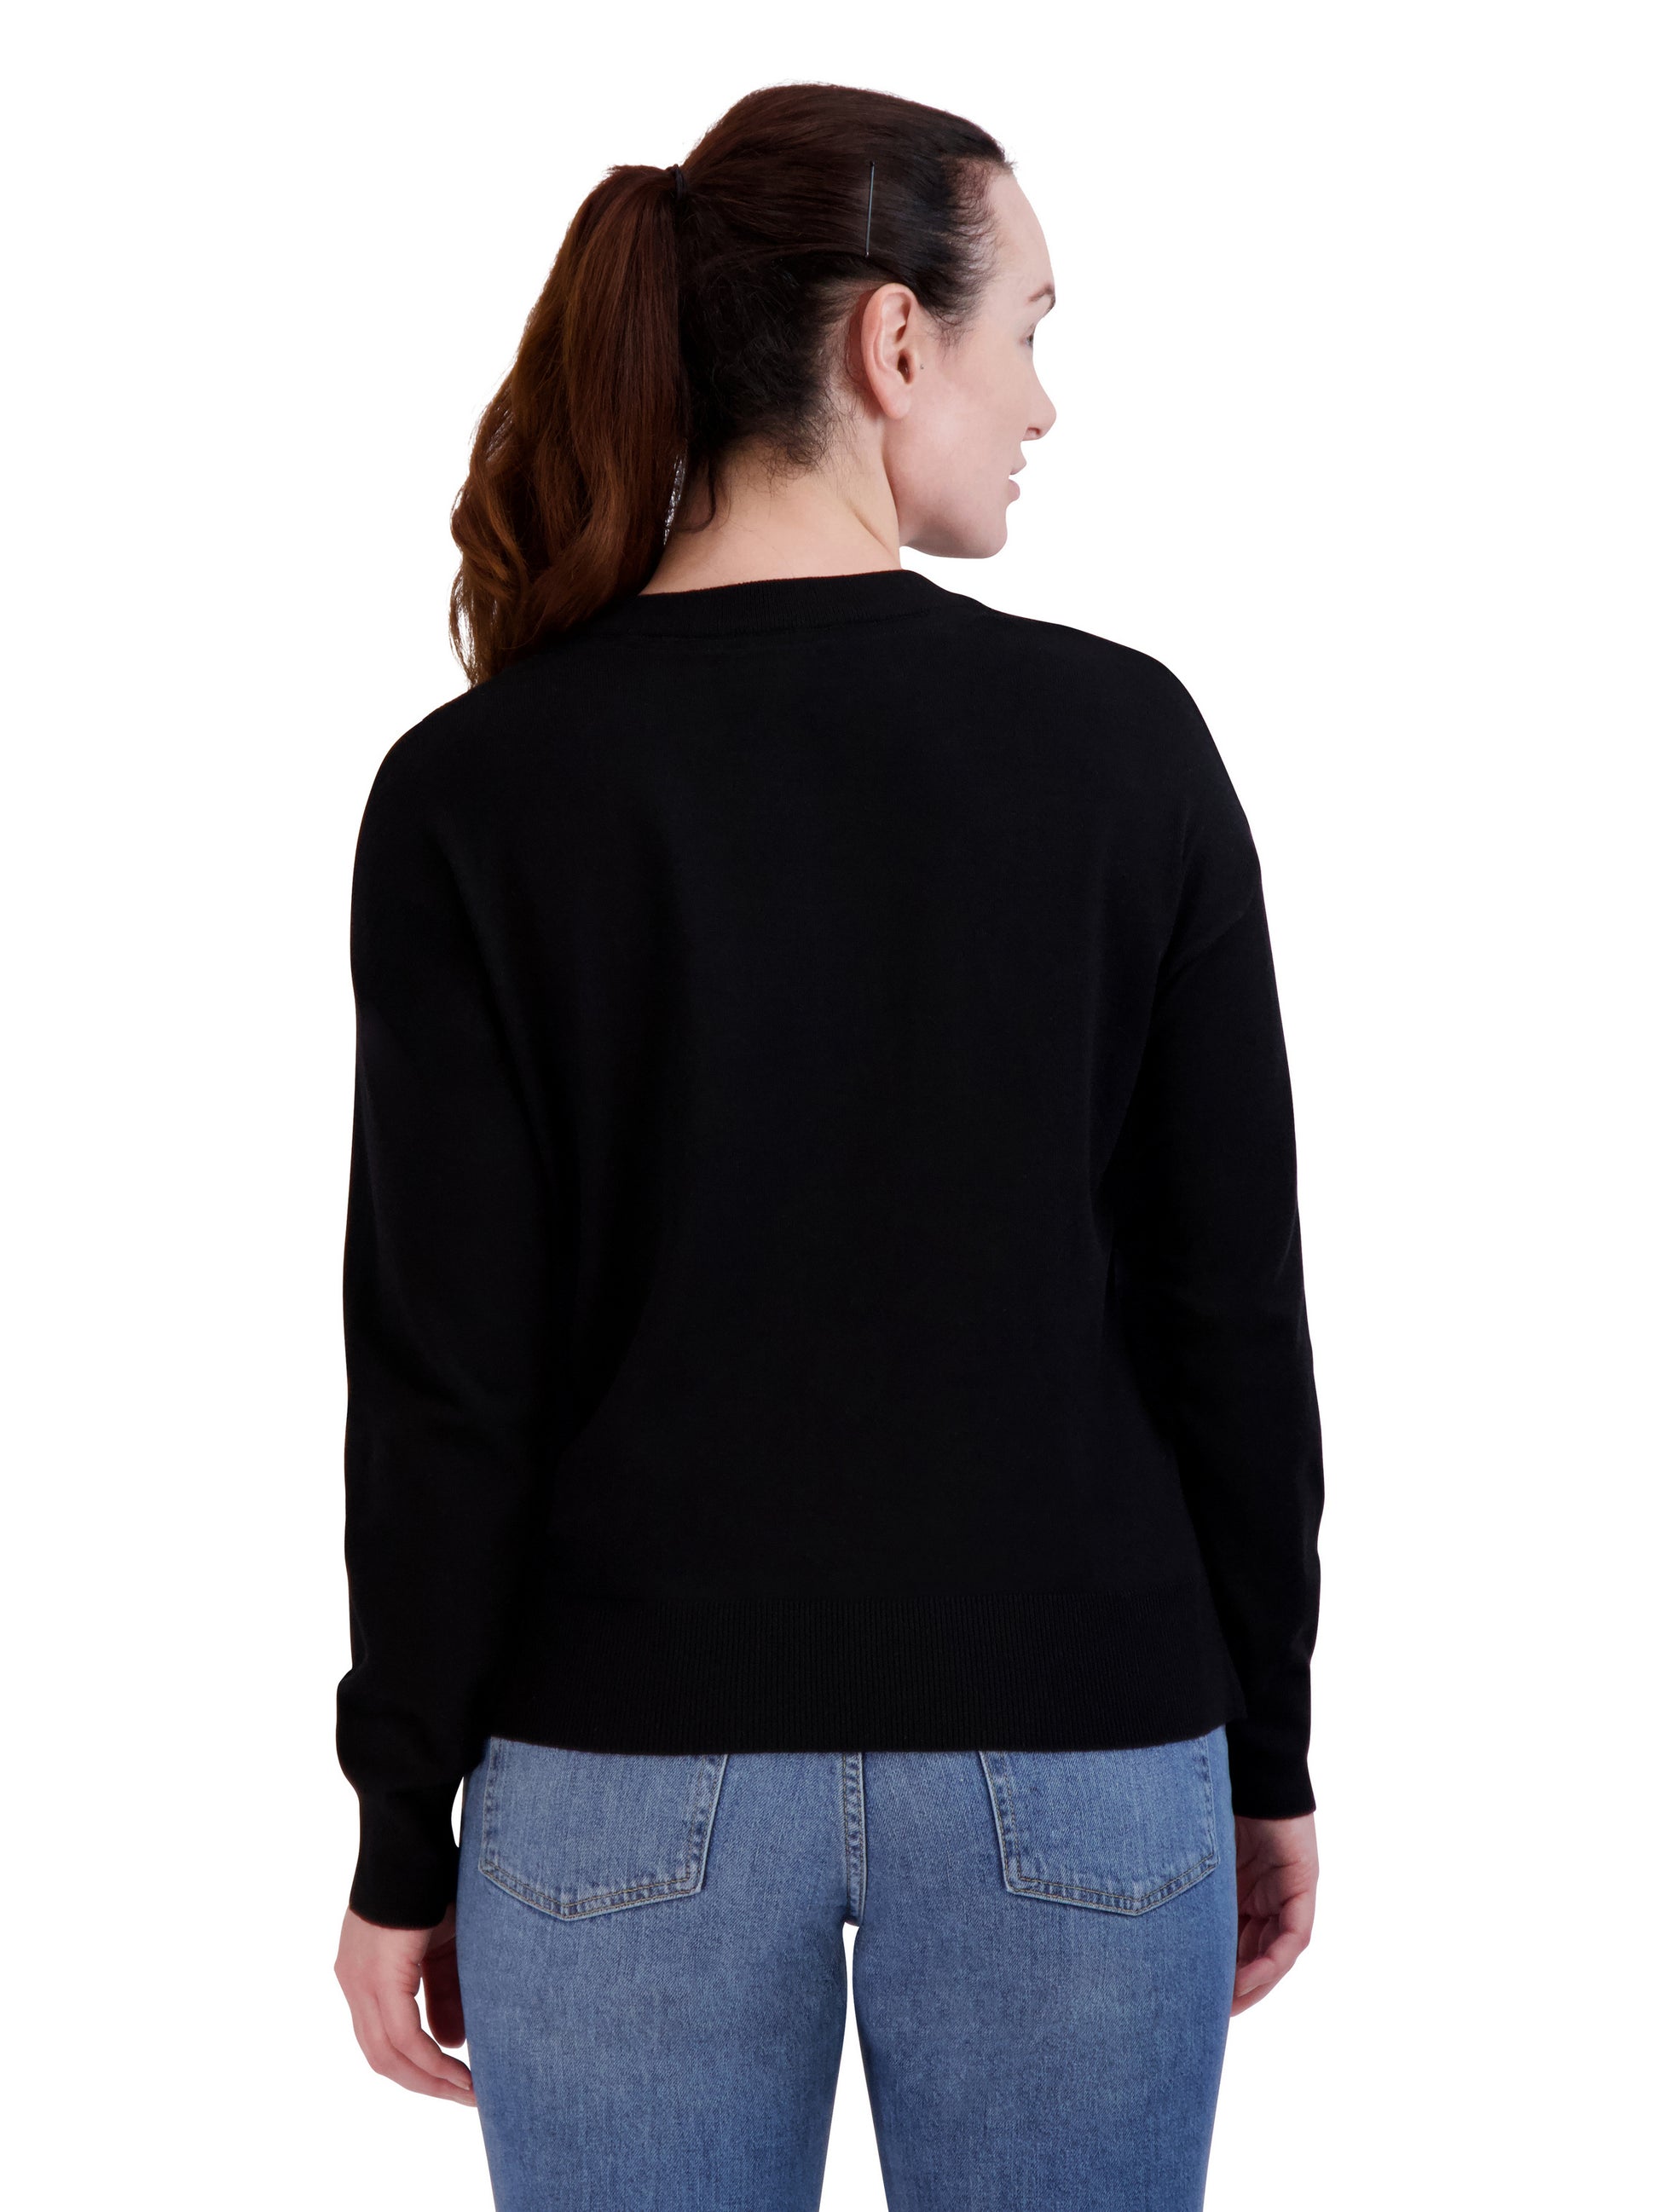 Women's Embroidered "HAPPY" Knit Black Sweater - Rae Dunn Wear - W Sweater